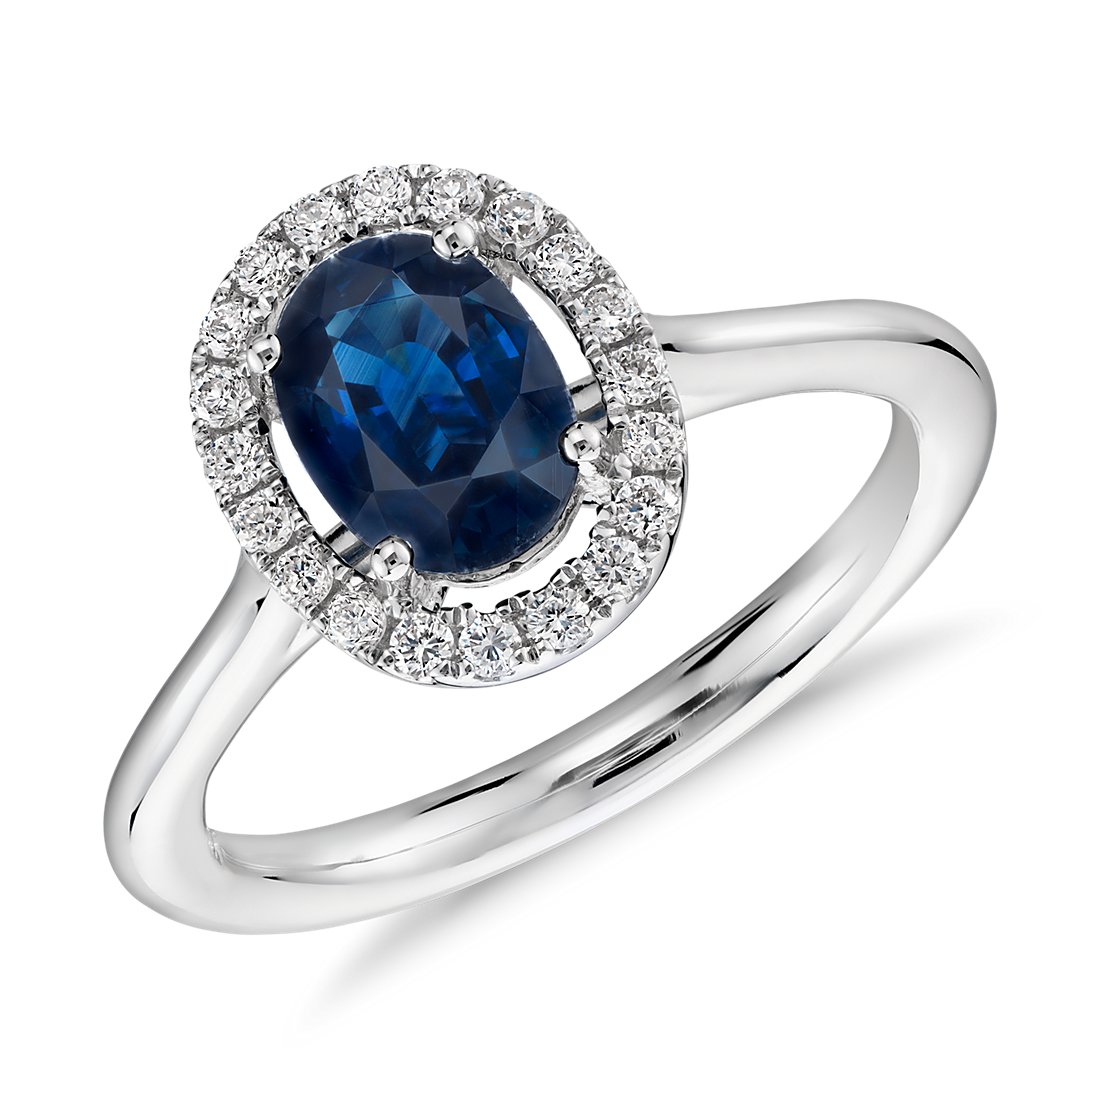 10 of the Most Iconic Celebrity Engagement Rings | Blue Nile